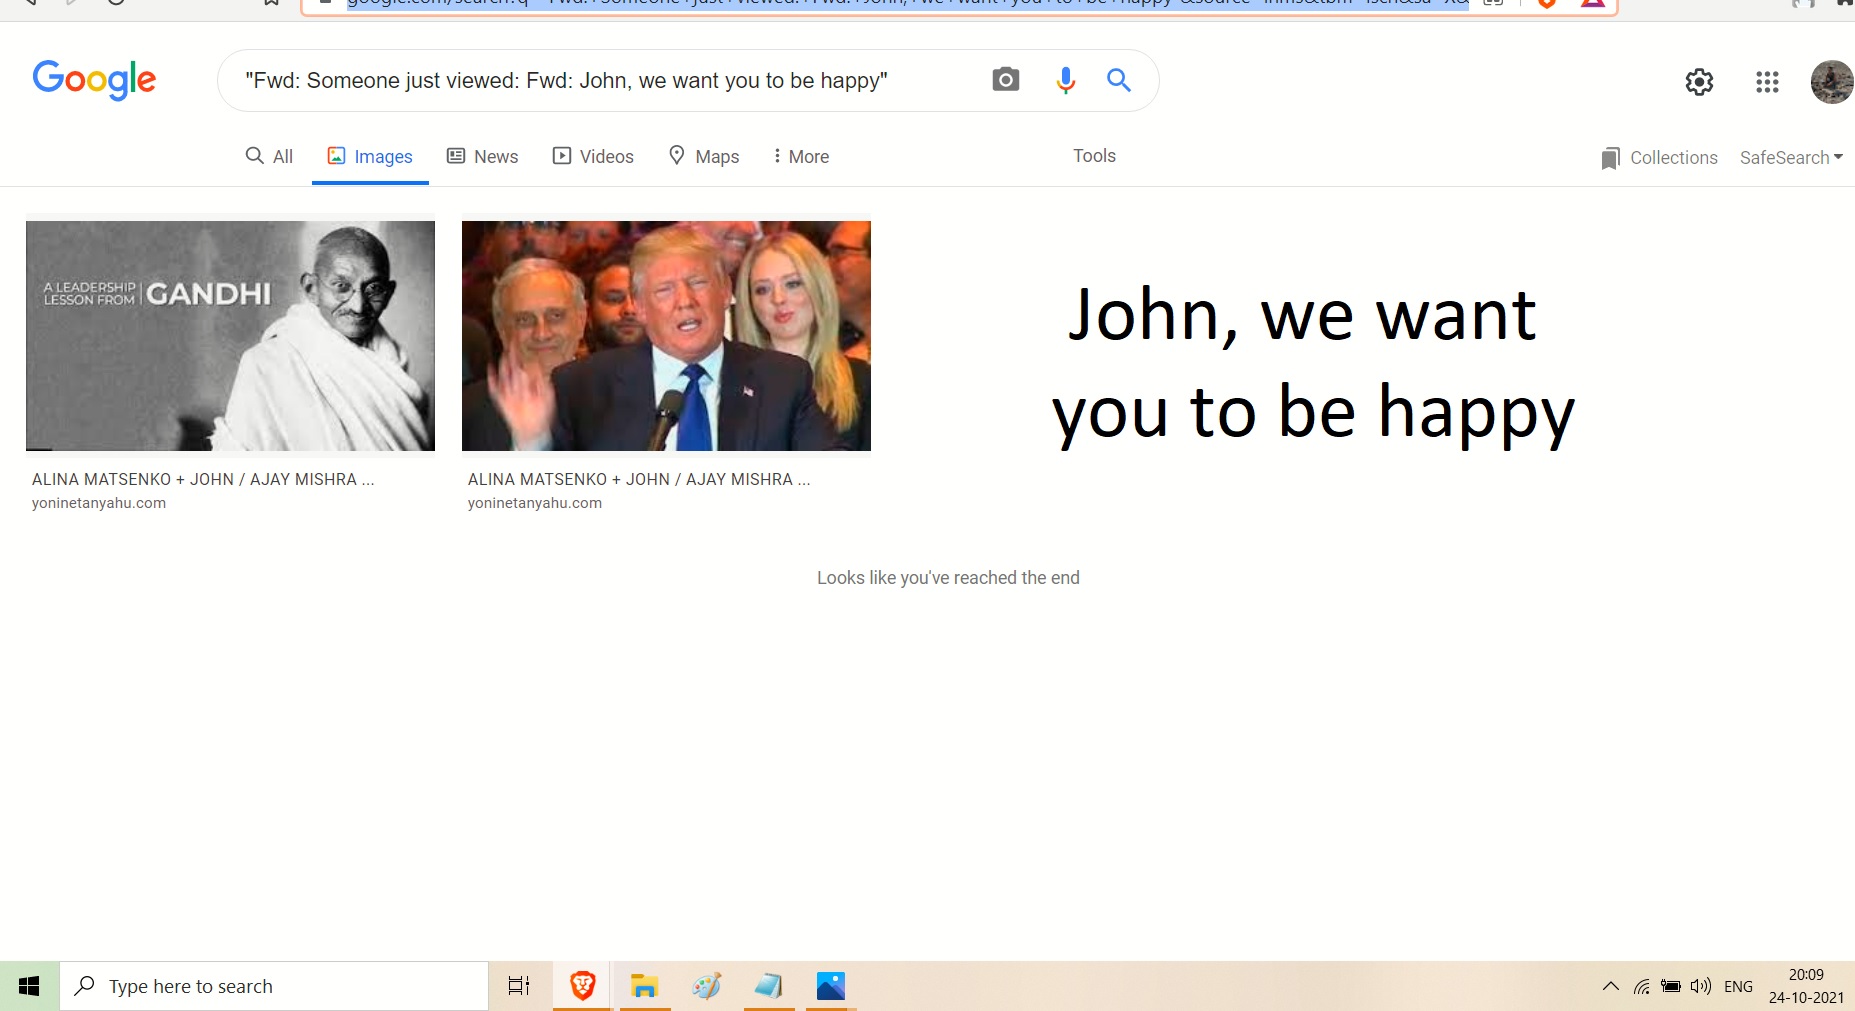 John, we want you to be happy